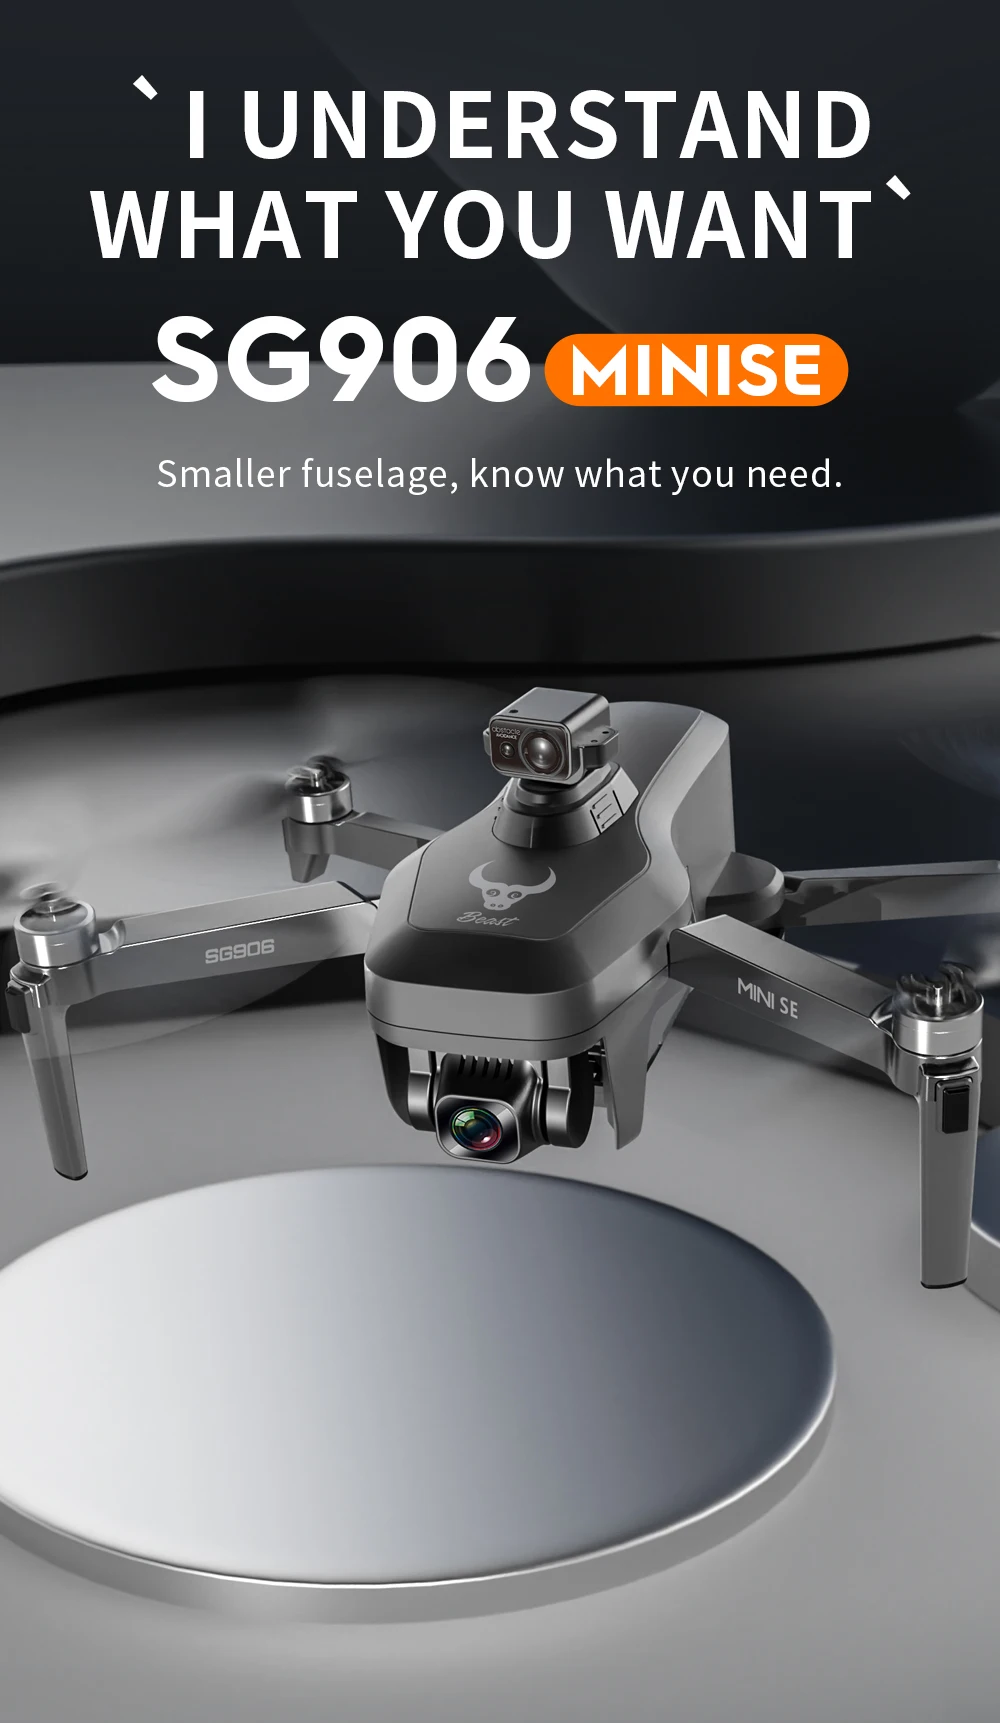 ZLL SG906 MINI SE Drone, Ee42 SG9O6 MINISE Smaller fuselage, know what you need